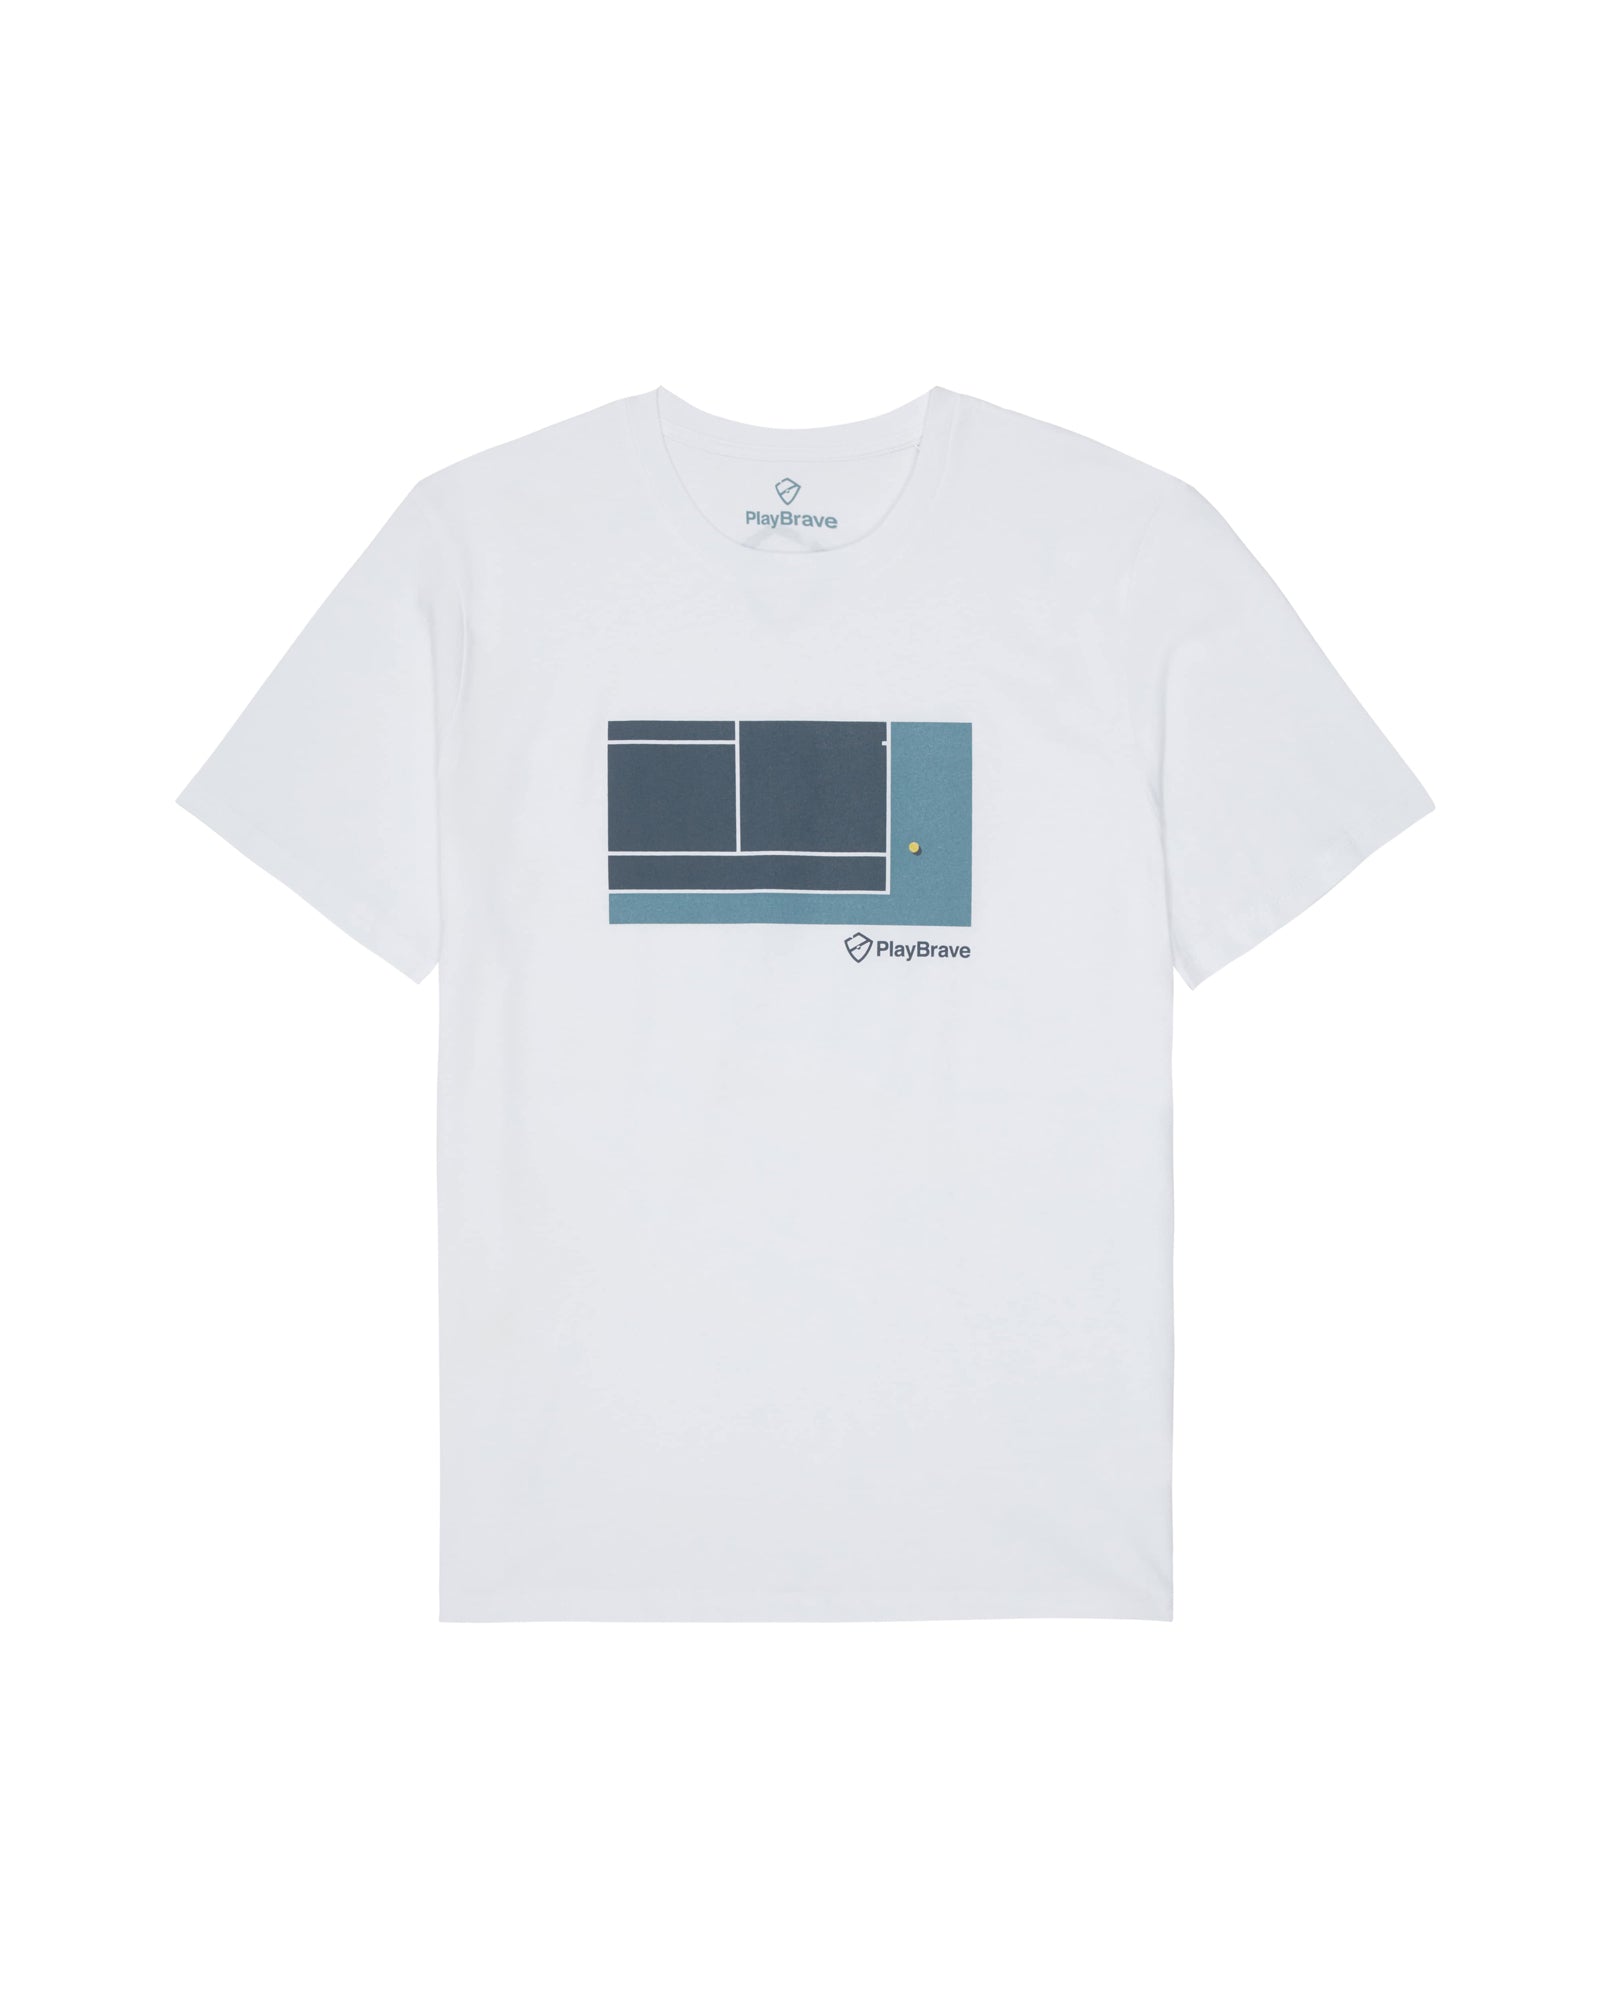 Wilfred Tee - White